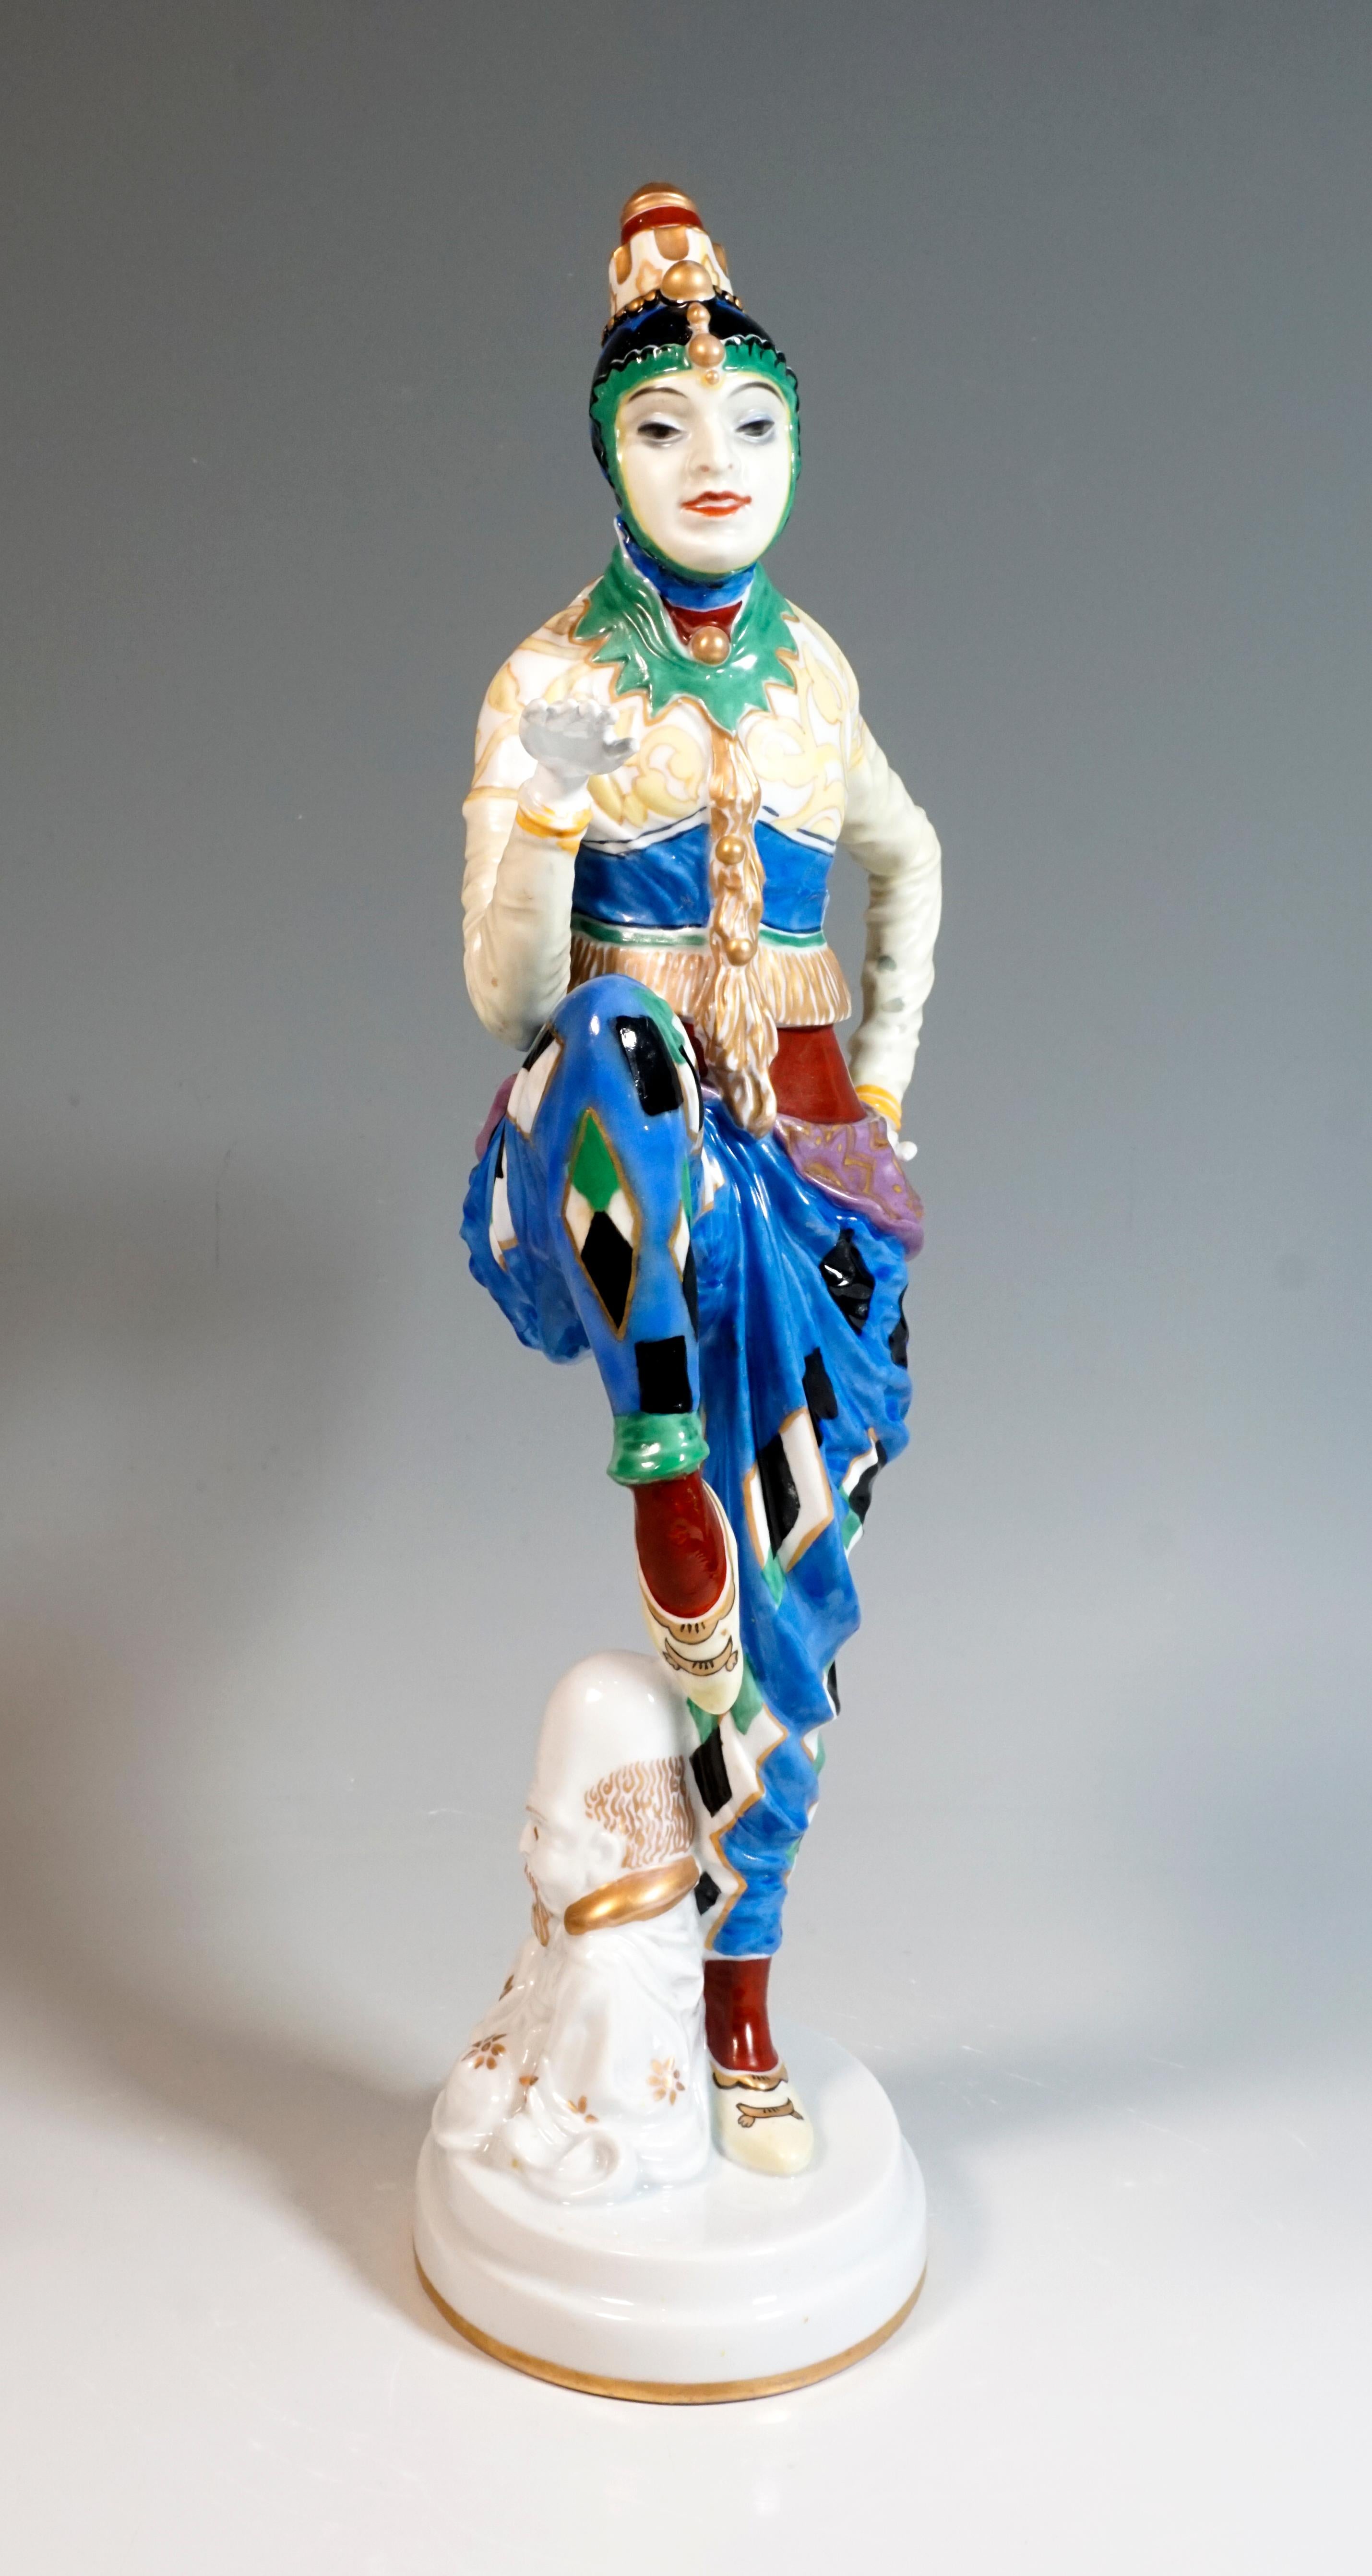 Dancer in an oriental costume with traditional Korean headgear, with raised, bent legs and arms performing a dance pose, a Chinese pagoda leaning against her leg. The figure is richly painted in bright colors and gold and is based on a white,